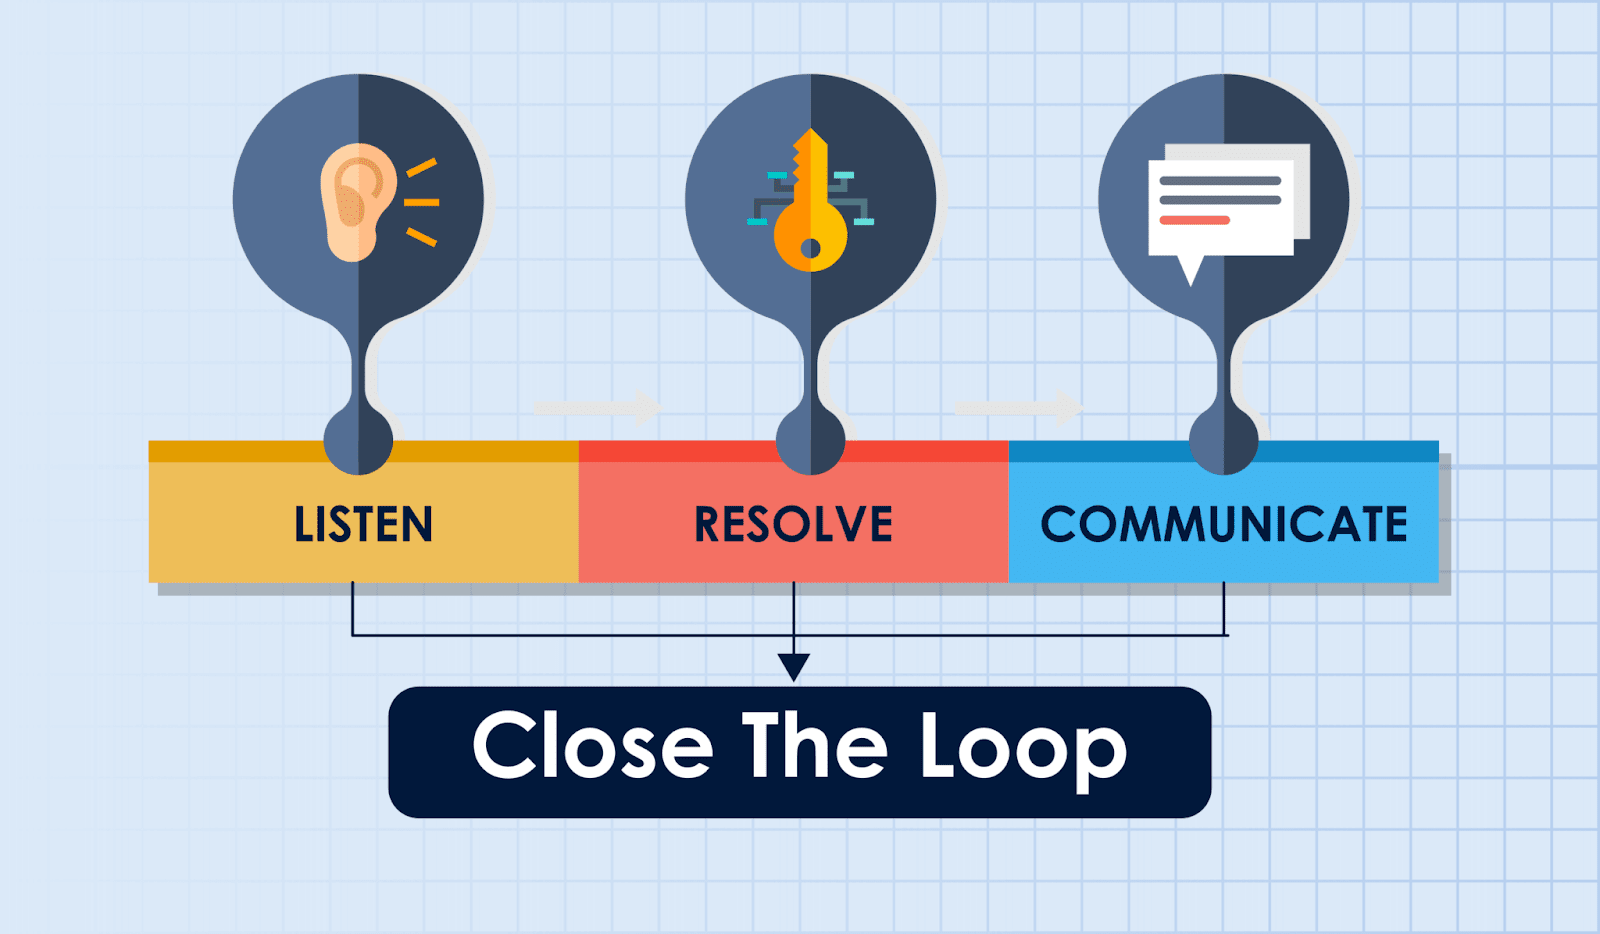 This is a pictorial representation of the close feedback loop process which involves listening, resolving, and communicating.